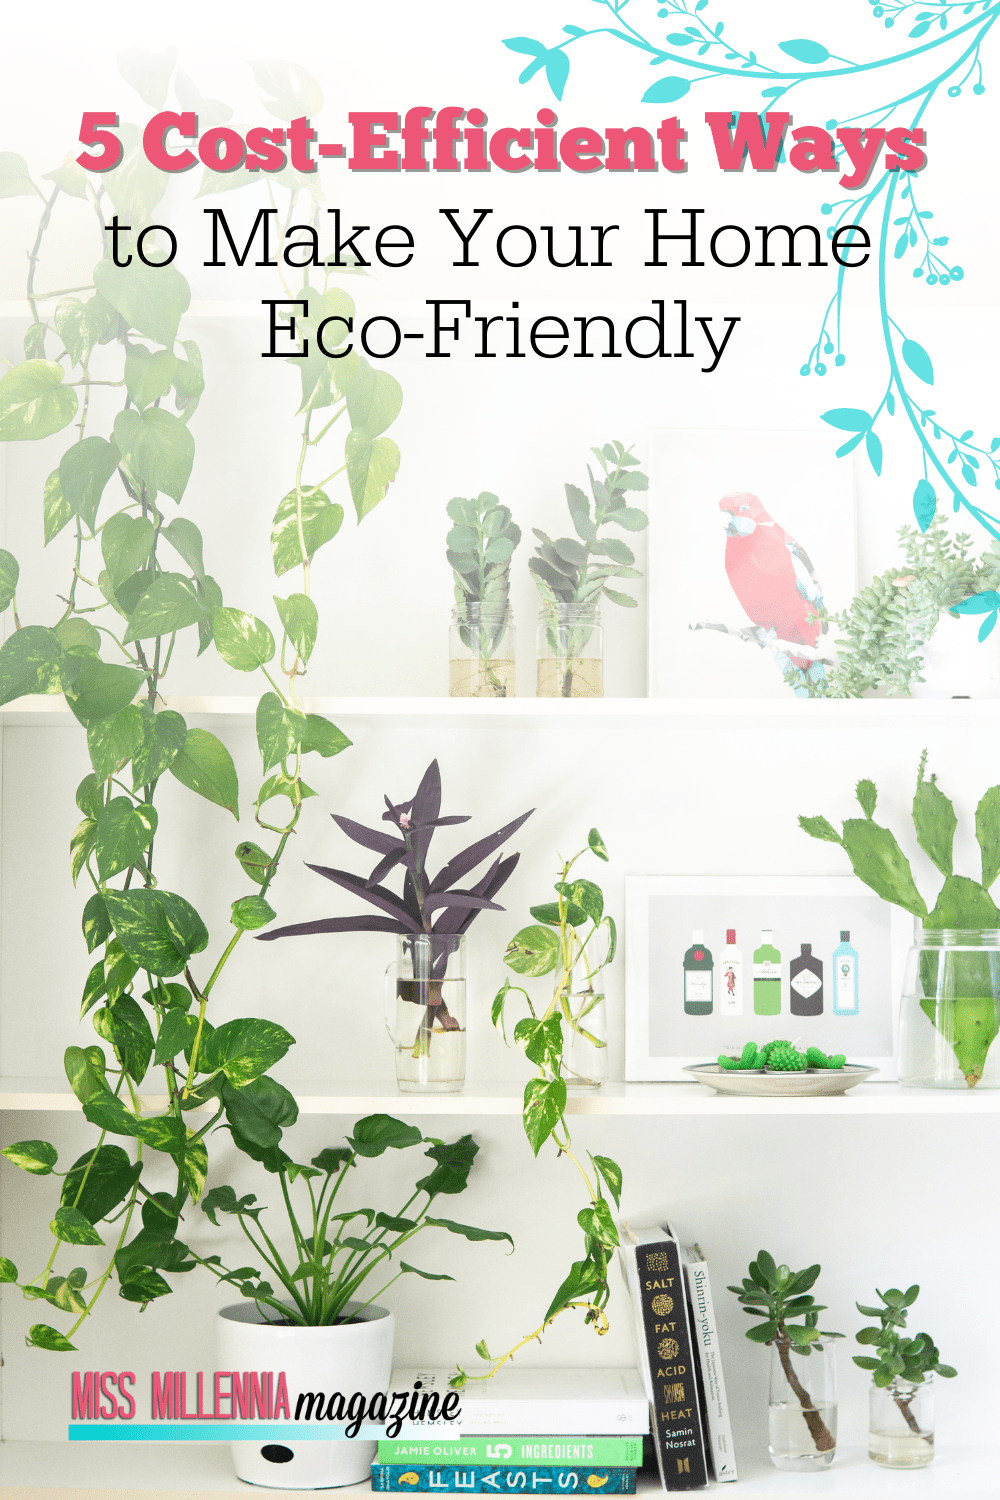 6 Cost-Efficient Ways to Make Your Home Eco-Friendly